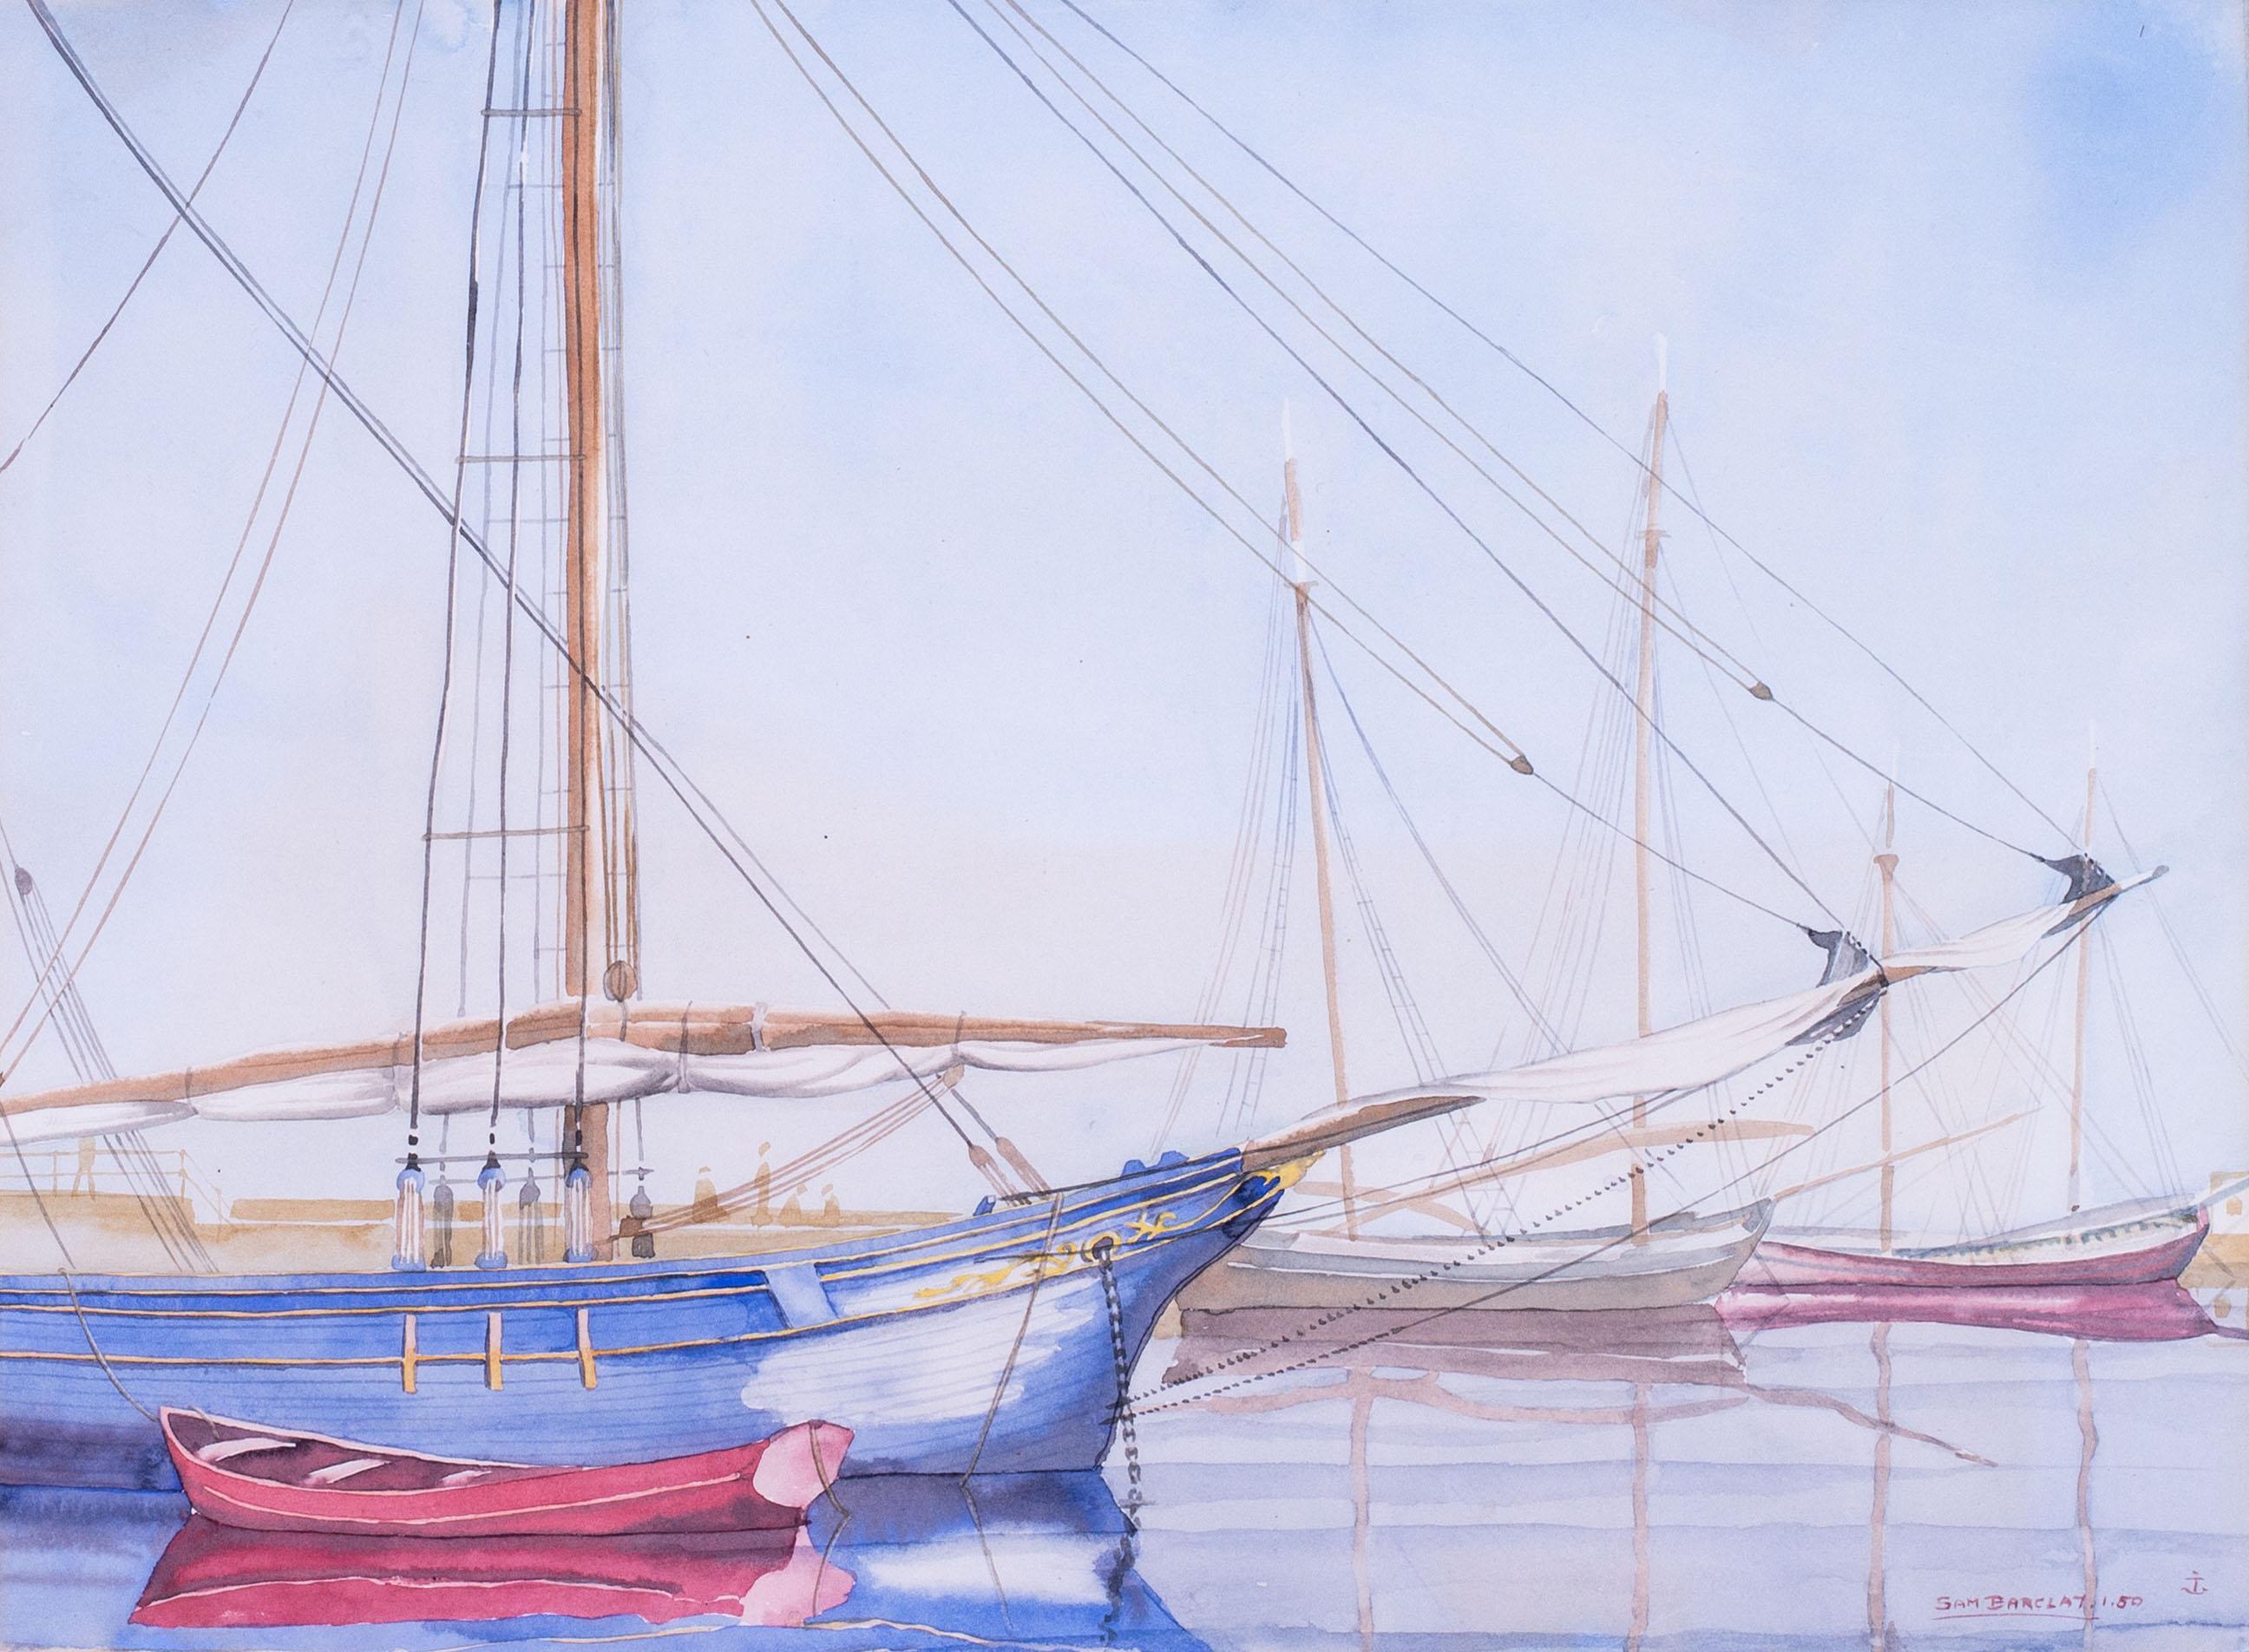 British 20th Century watercolour of sailing vessels in a harbour - Art by Sam Barclay